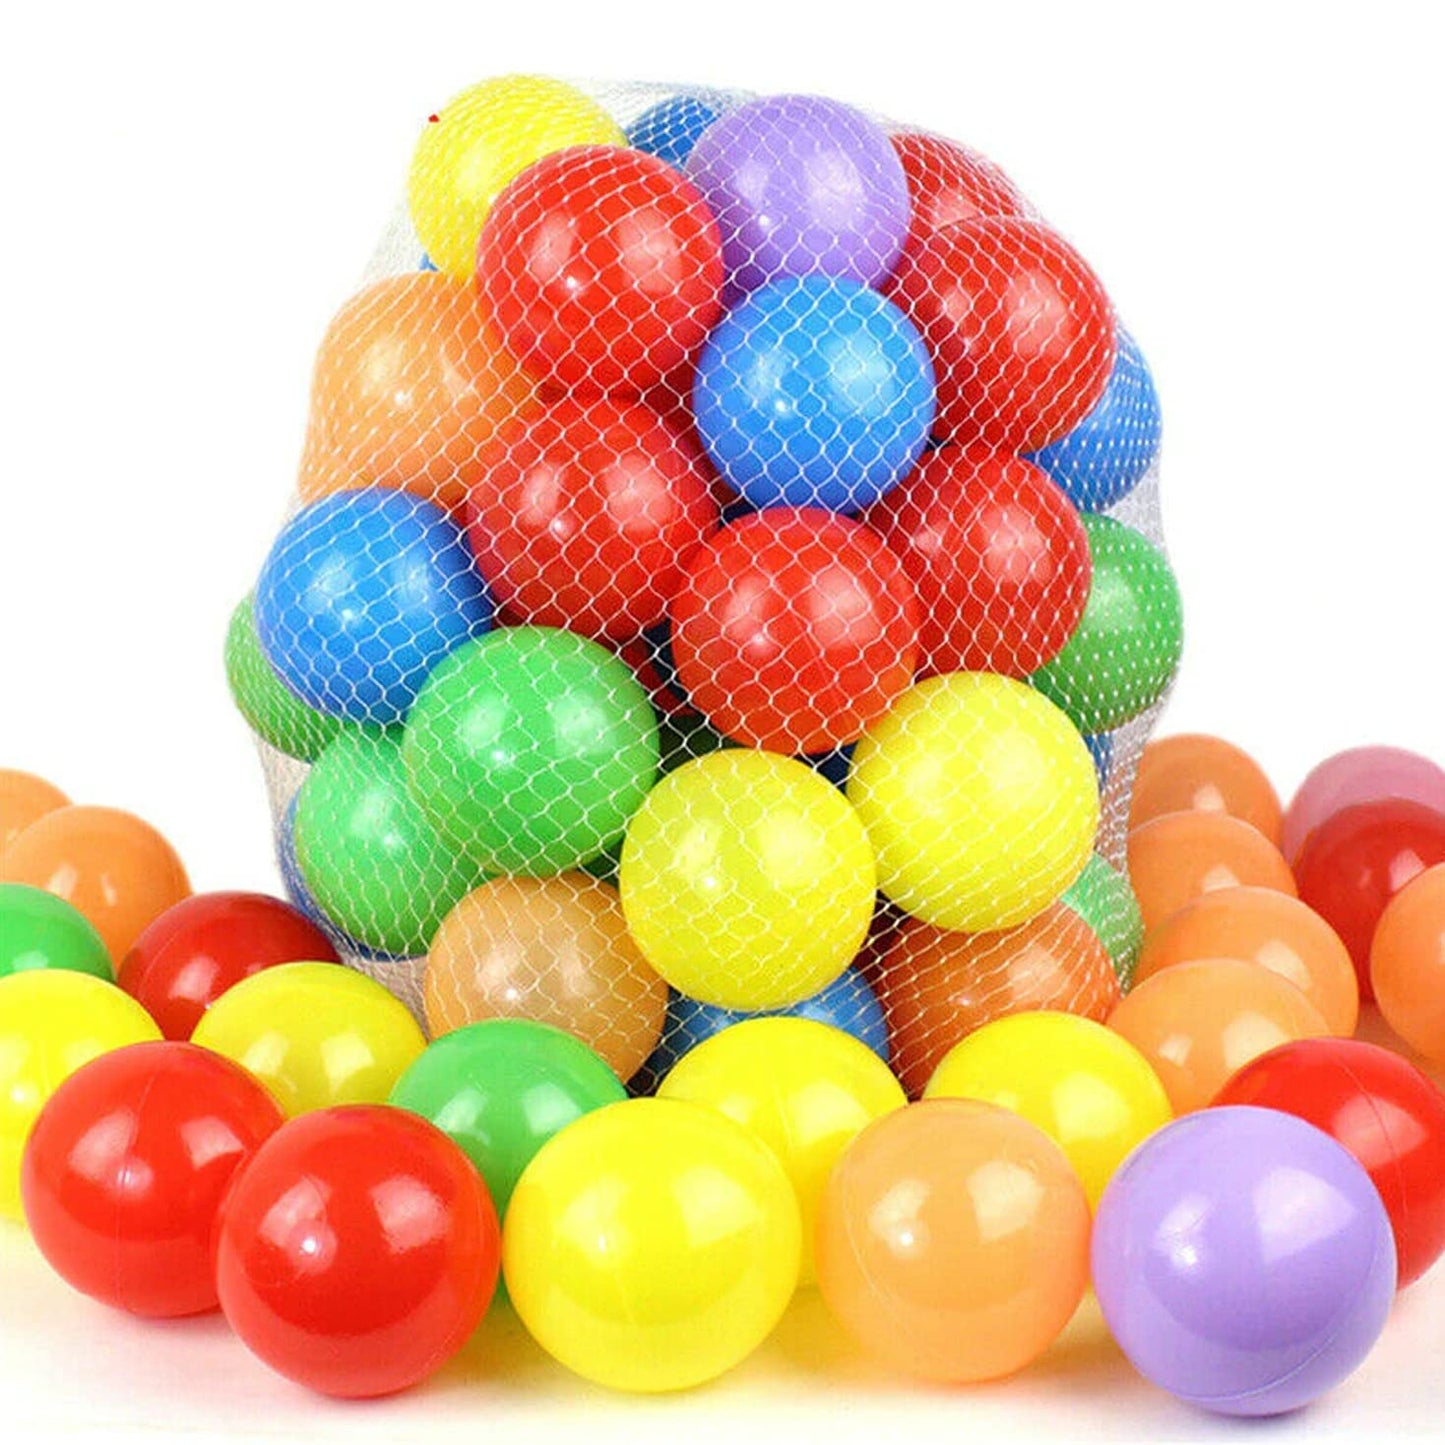 BAYBEE Soft Plastic Baby Pit Balls for Kids Reusable Soft Crush Proof Play Pit Balls Multicolour 6CM Balls for Pool Pit - (408 Pcs)